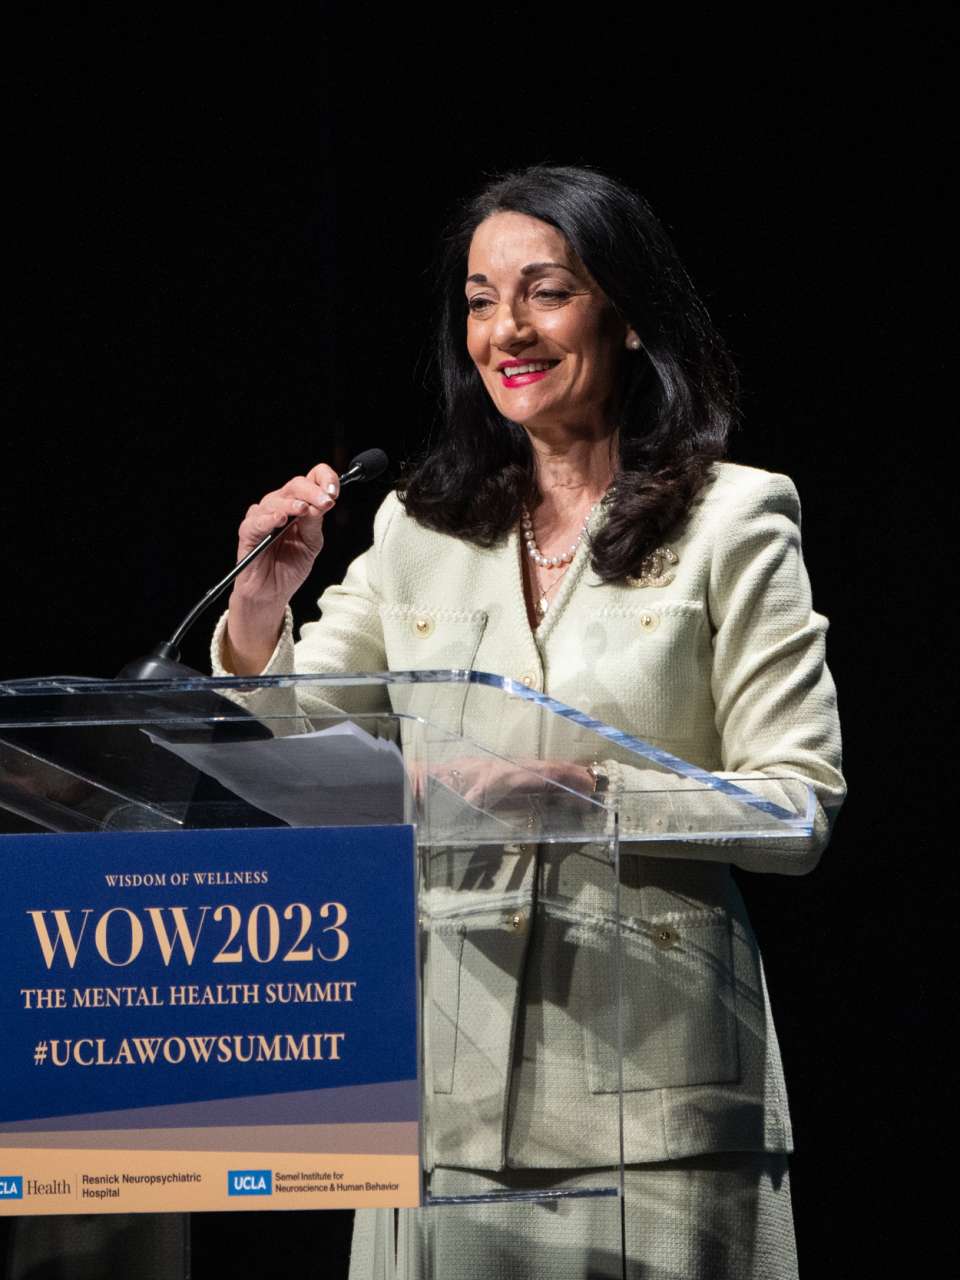 UCLA Health President Johnese Spisso, MPA, announced that UCLA will open a dedicated mental health hospital in 2026. (Photo by Nick Carranza/UCLA Health)